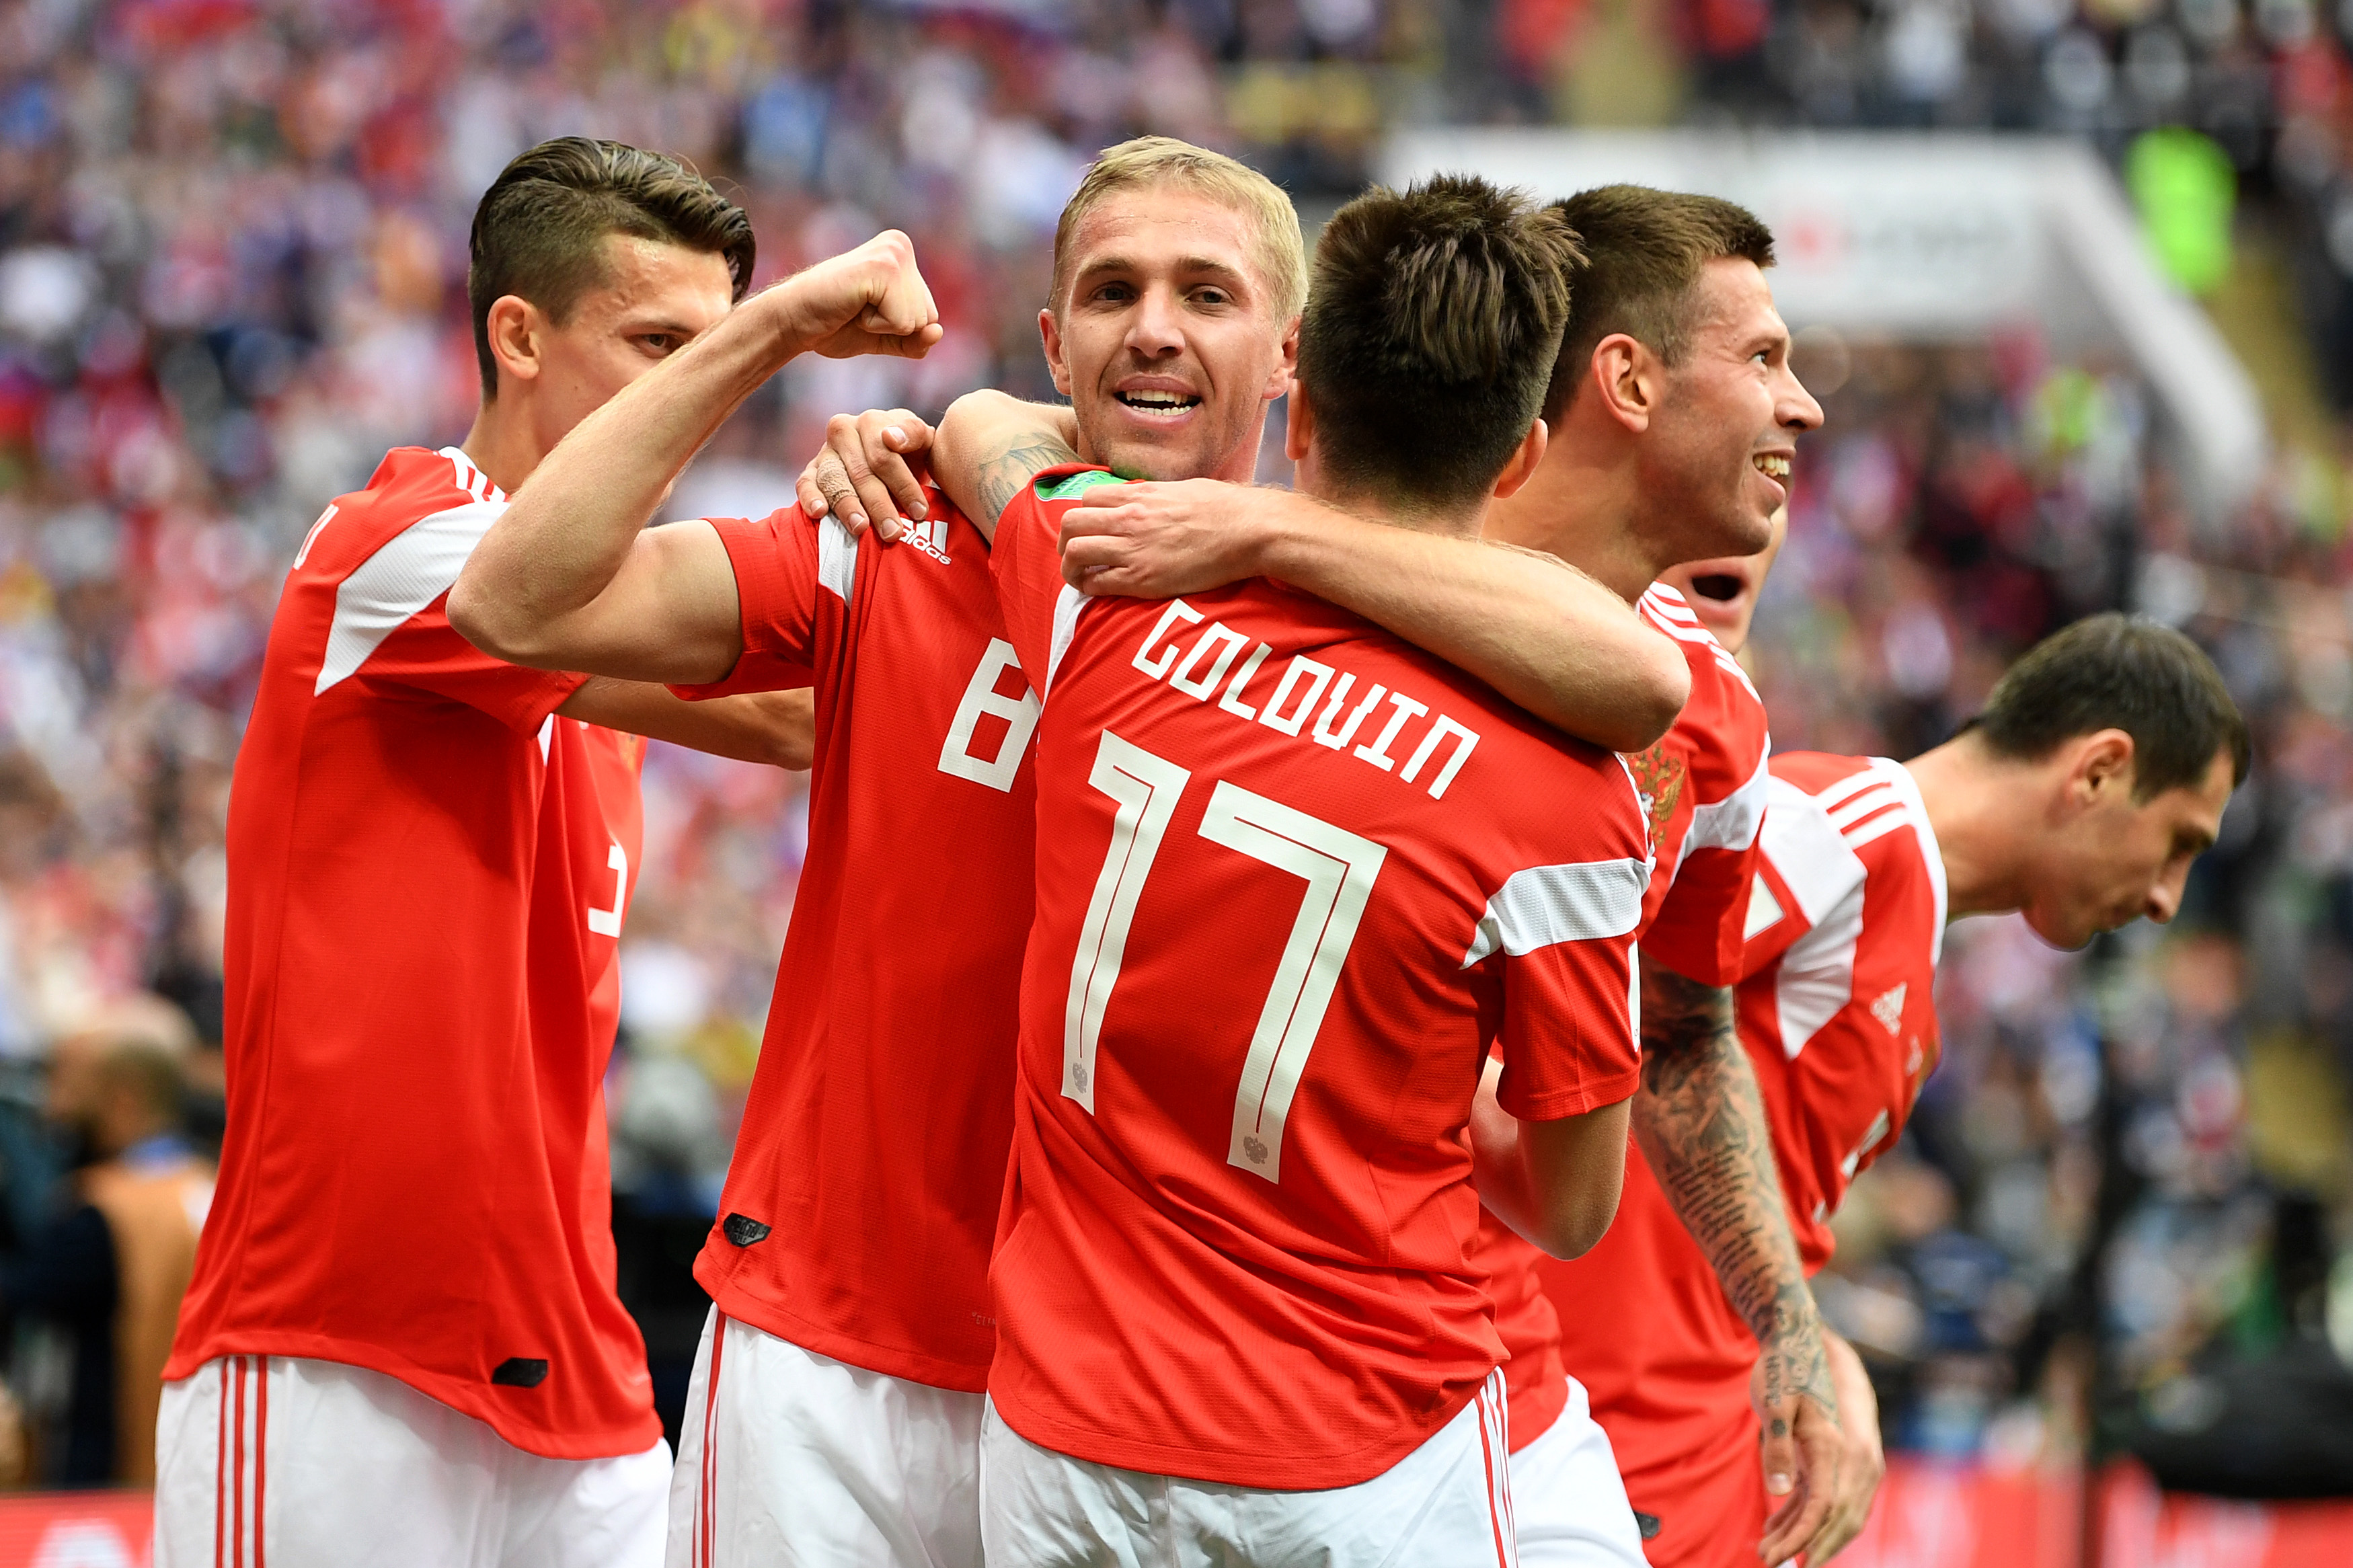 MOSCOW, RUSSIA - JUNE 14: Iury Gazinsky of Russia celebrates with teammates after scoring the opening goal during the 2018 FIFA World Cup Russia Group A match between Russia and Saudi Arabia at Luzhniki Stadium on June 14, 2018 in Moscow, Russia.  (Photo by Michael Regan - FIFA/FIFA via Getty Images)